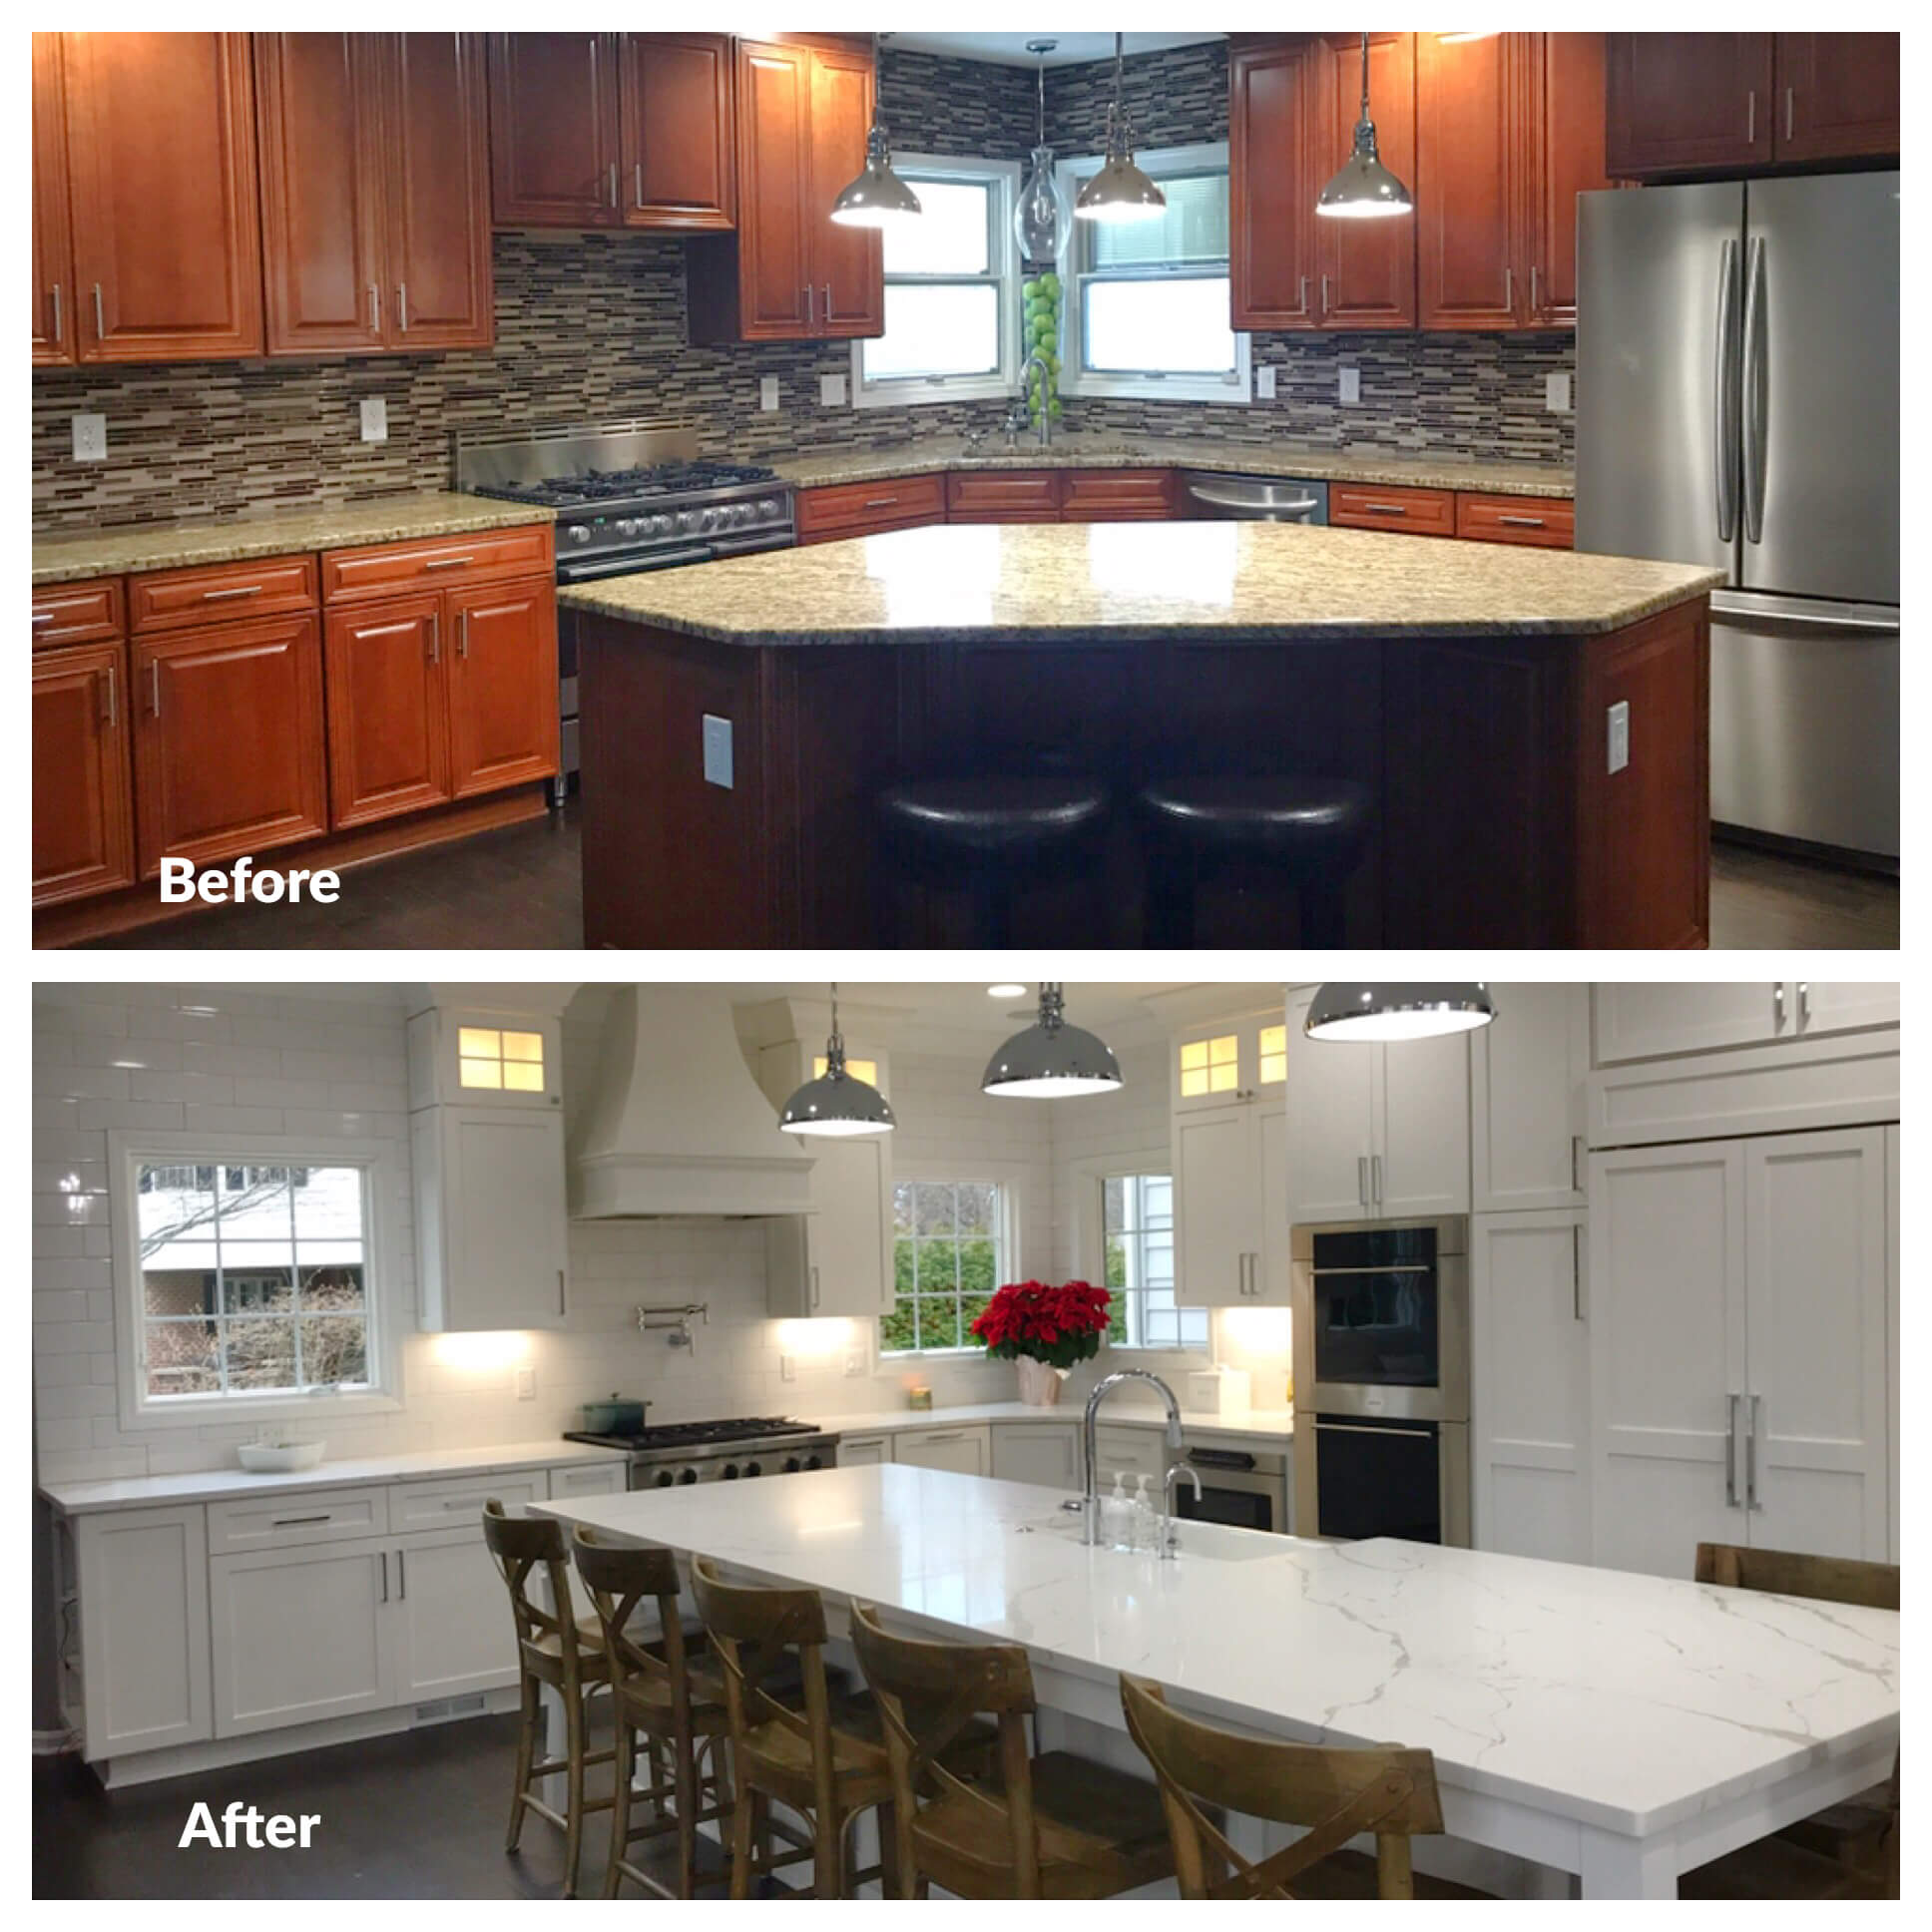 Before and After kitchen island